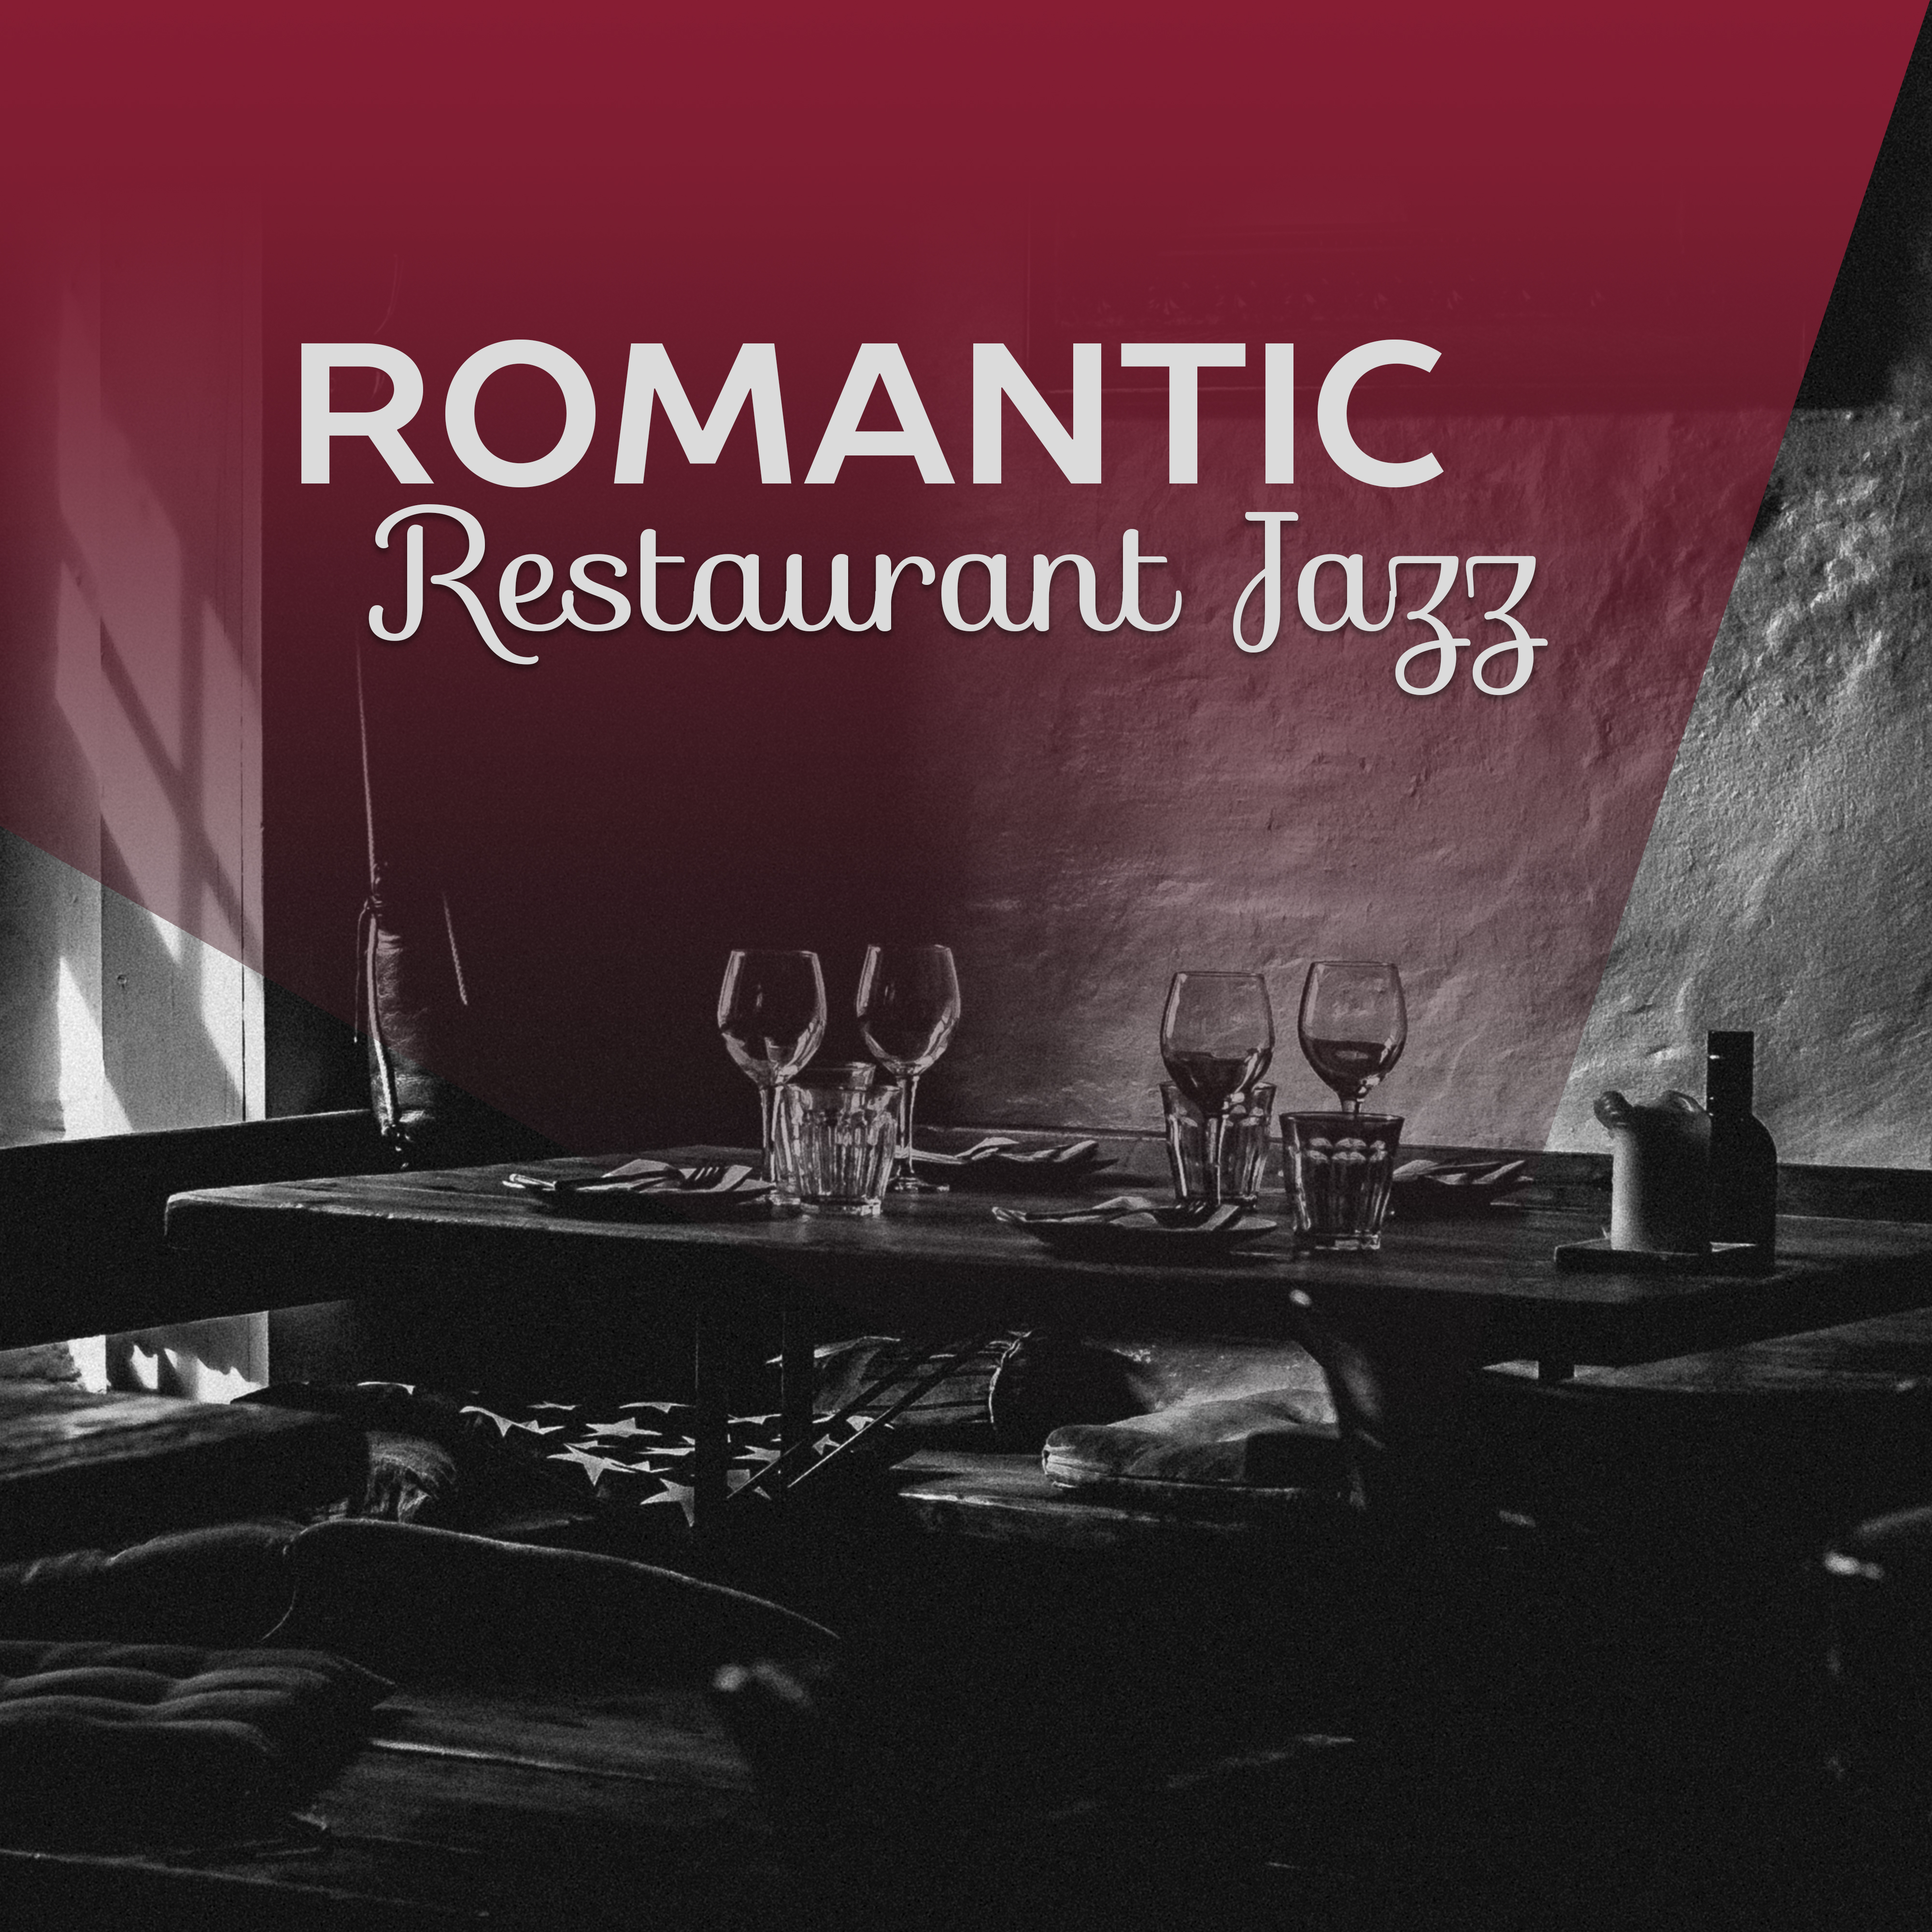 Romantic Restaurant Jazz  Calm Down  Relax, Soothing Jazz, Music for Lovers, Jazz Relaxation